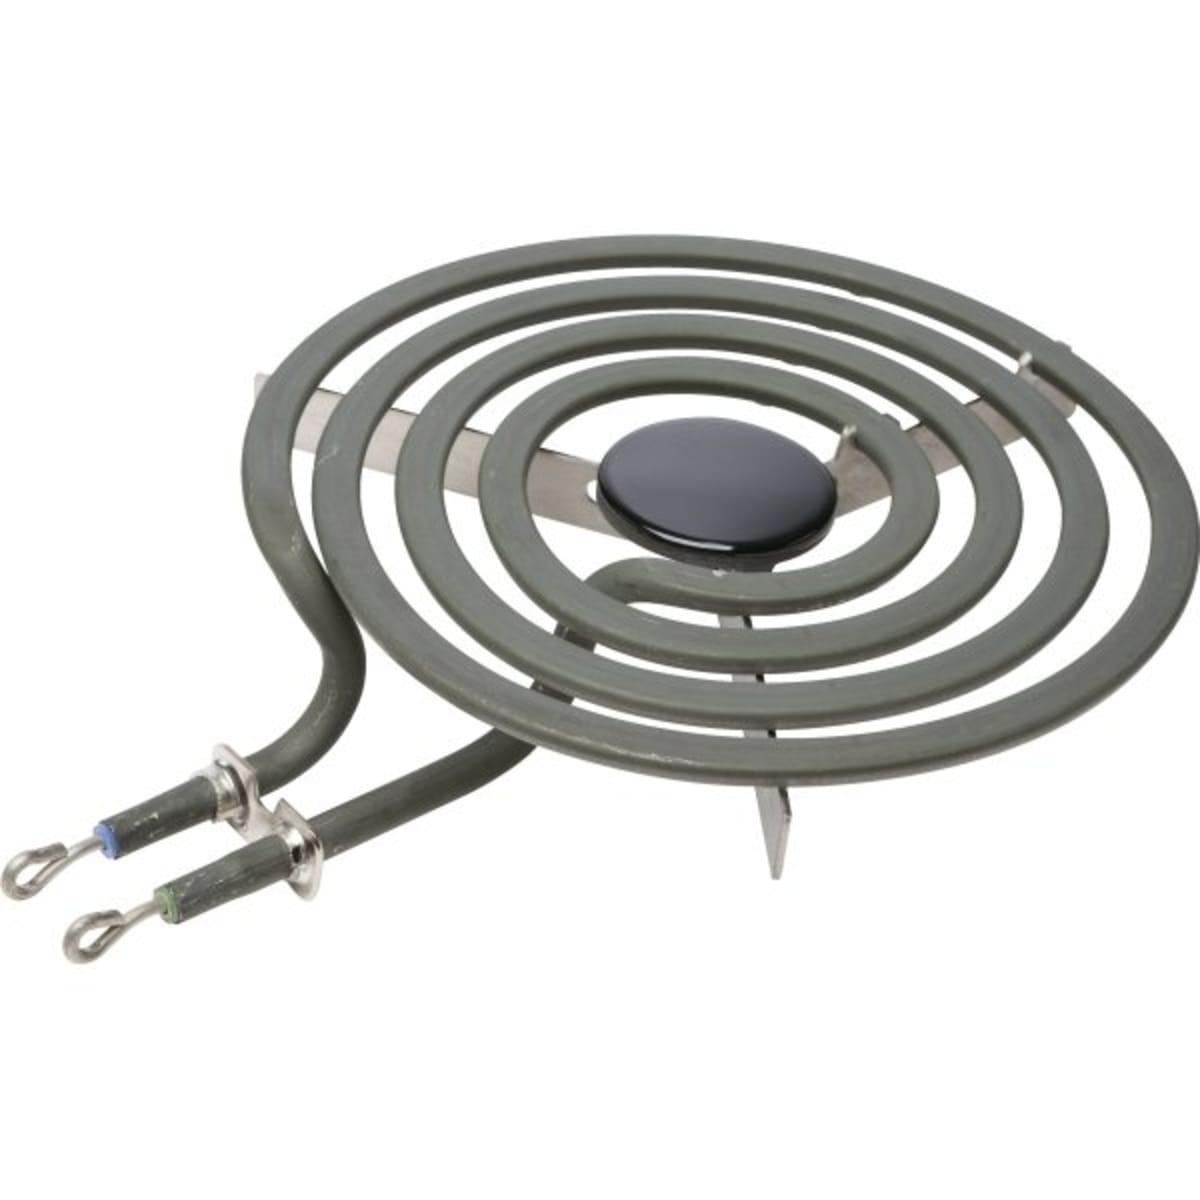 Apparsol 7 Stove Surface Burner Heating Element, 4 Turns replaces ERS48Y21 TJ90SP21YA SP21YA 814153 (2 Pack)